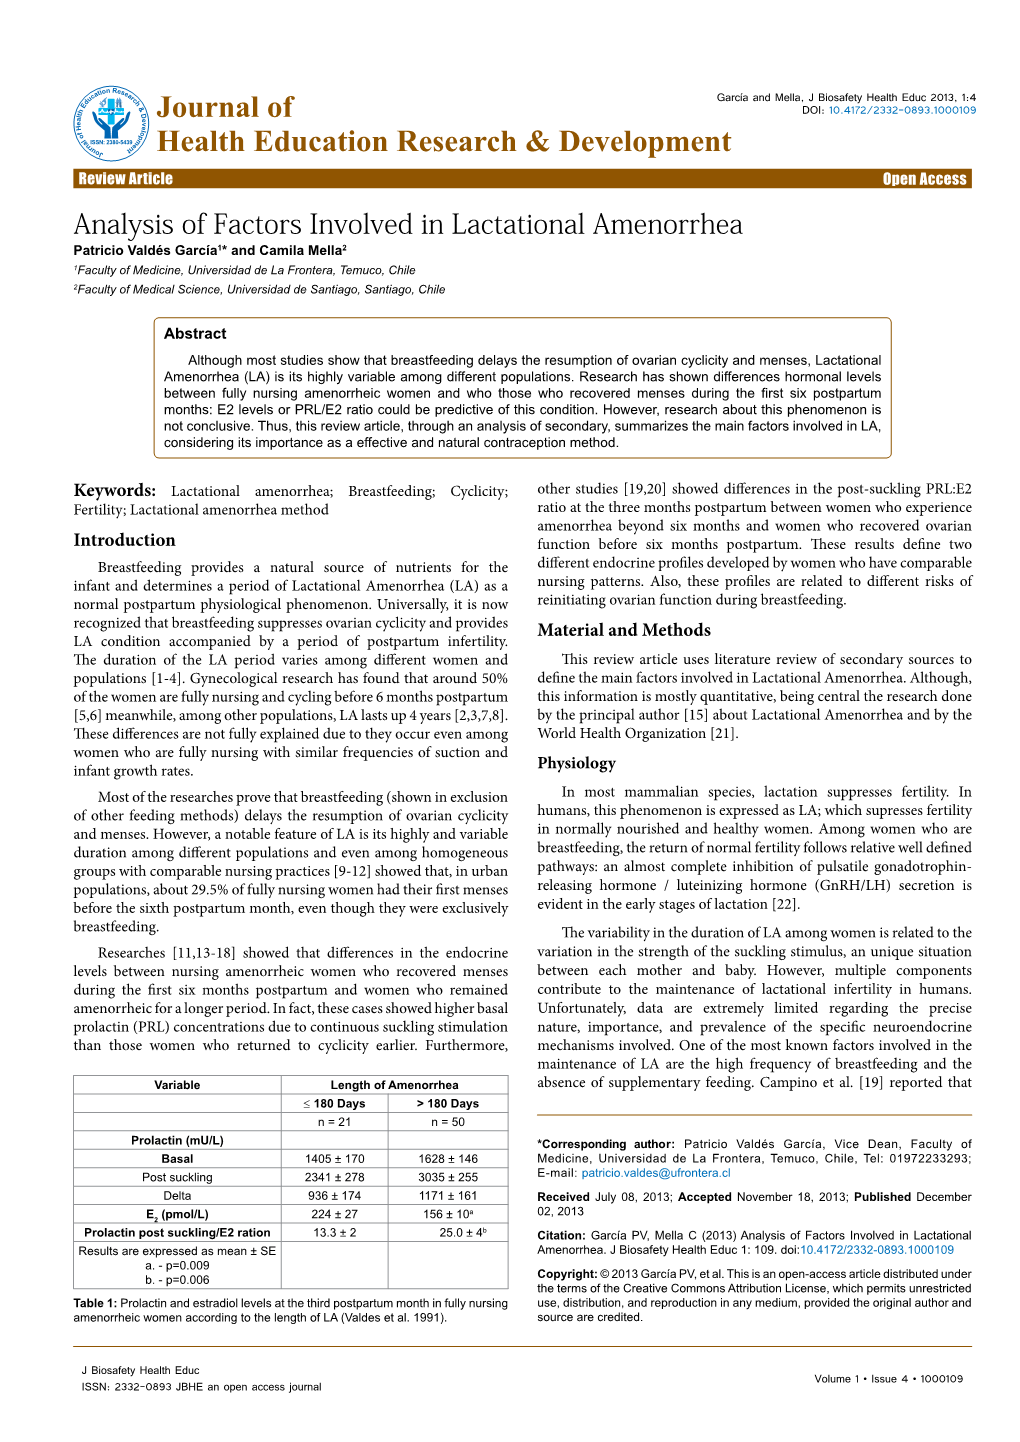 Analysis of Factors Involved in Lactational Amenorrhea